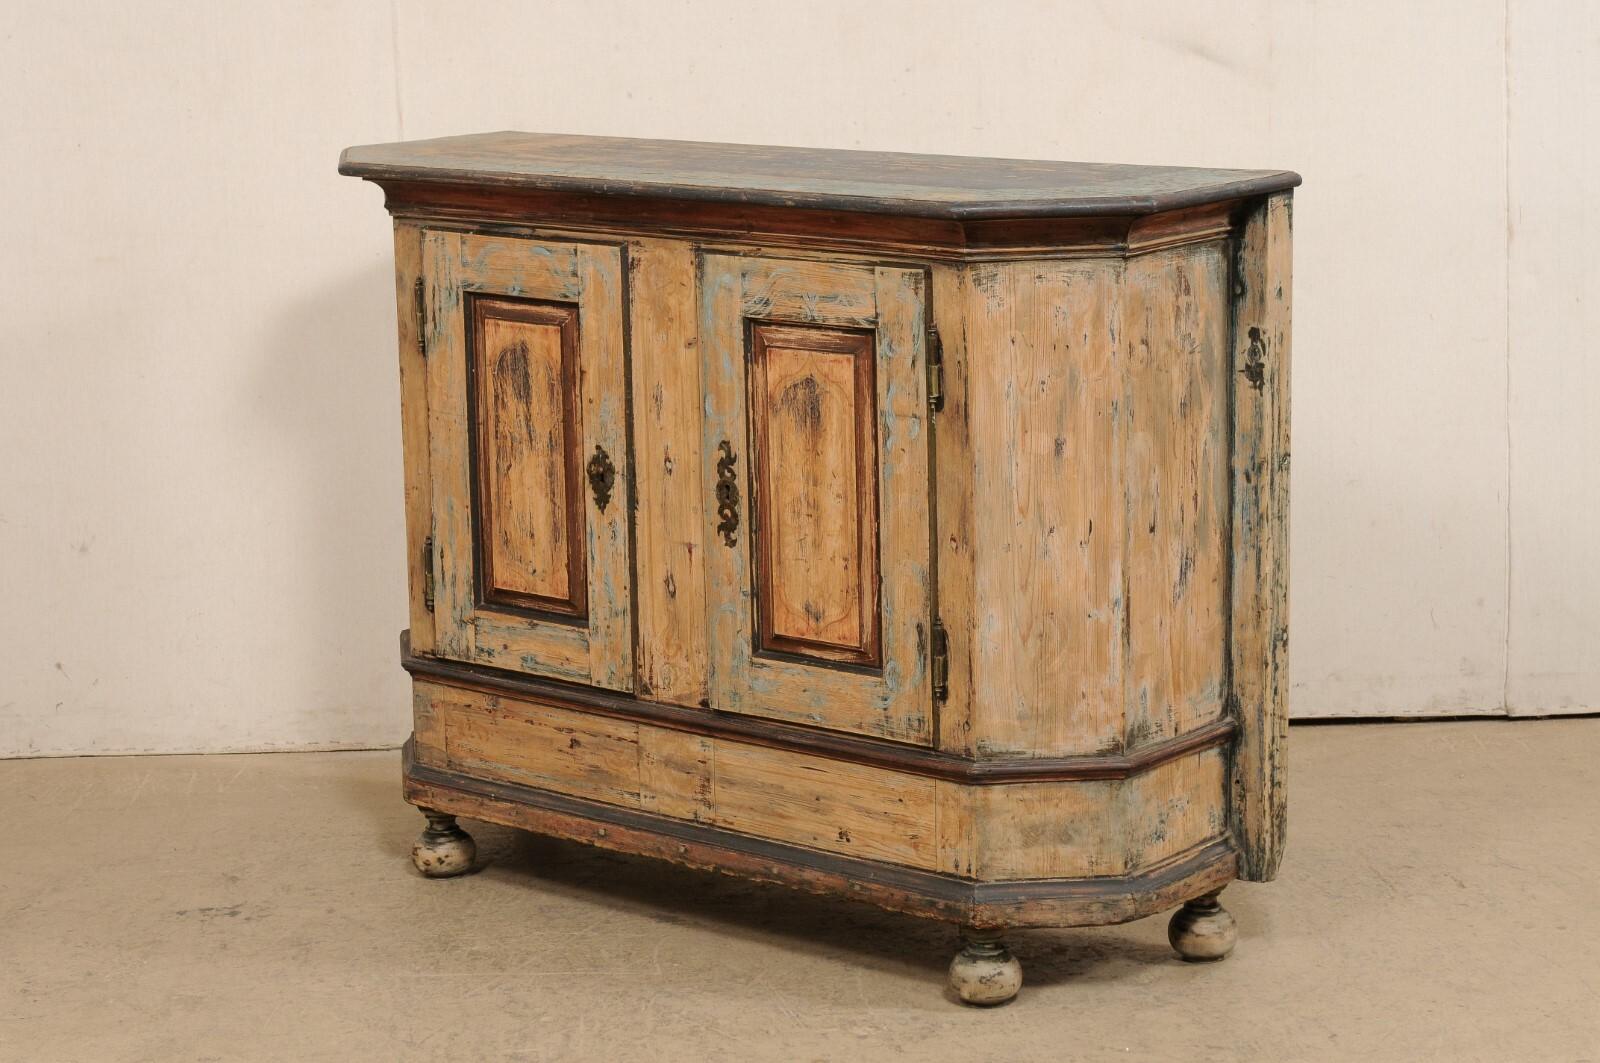 Italian 4.5 Ft. Wide Two-Door Wooden Credenza, Early 19th C. For Sale 5